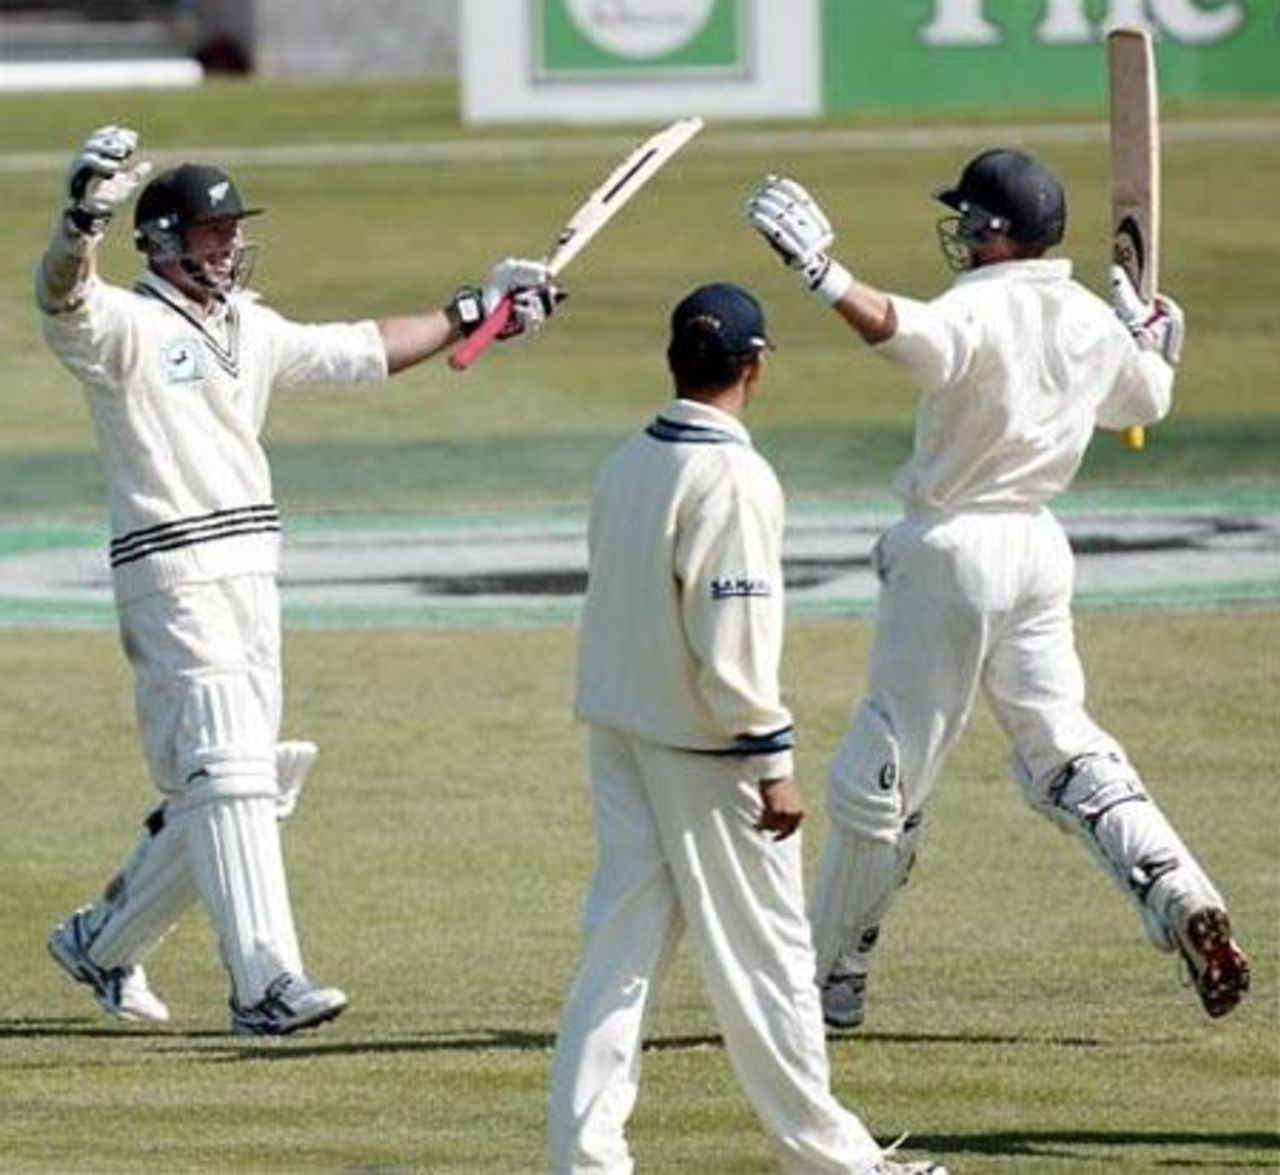 New Zealand batsmen Mark Richardson (left) and Lou Vincent celebrate New Zealand winning the match, beating India by 10 wickets. Indian captain Sourav Ganguly looks on. 1st Test: New Zealand v India at Basin Reserve, Wellington, 12-16 December 2002 (14 December 2002).